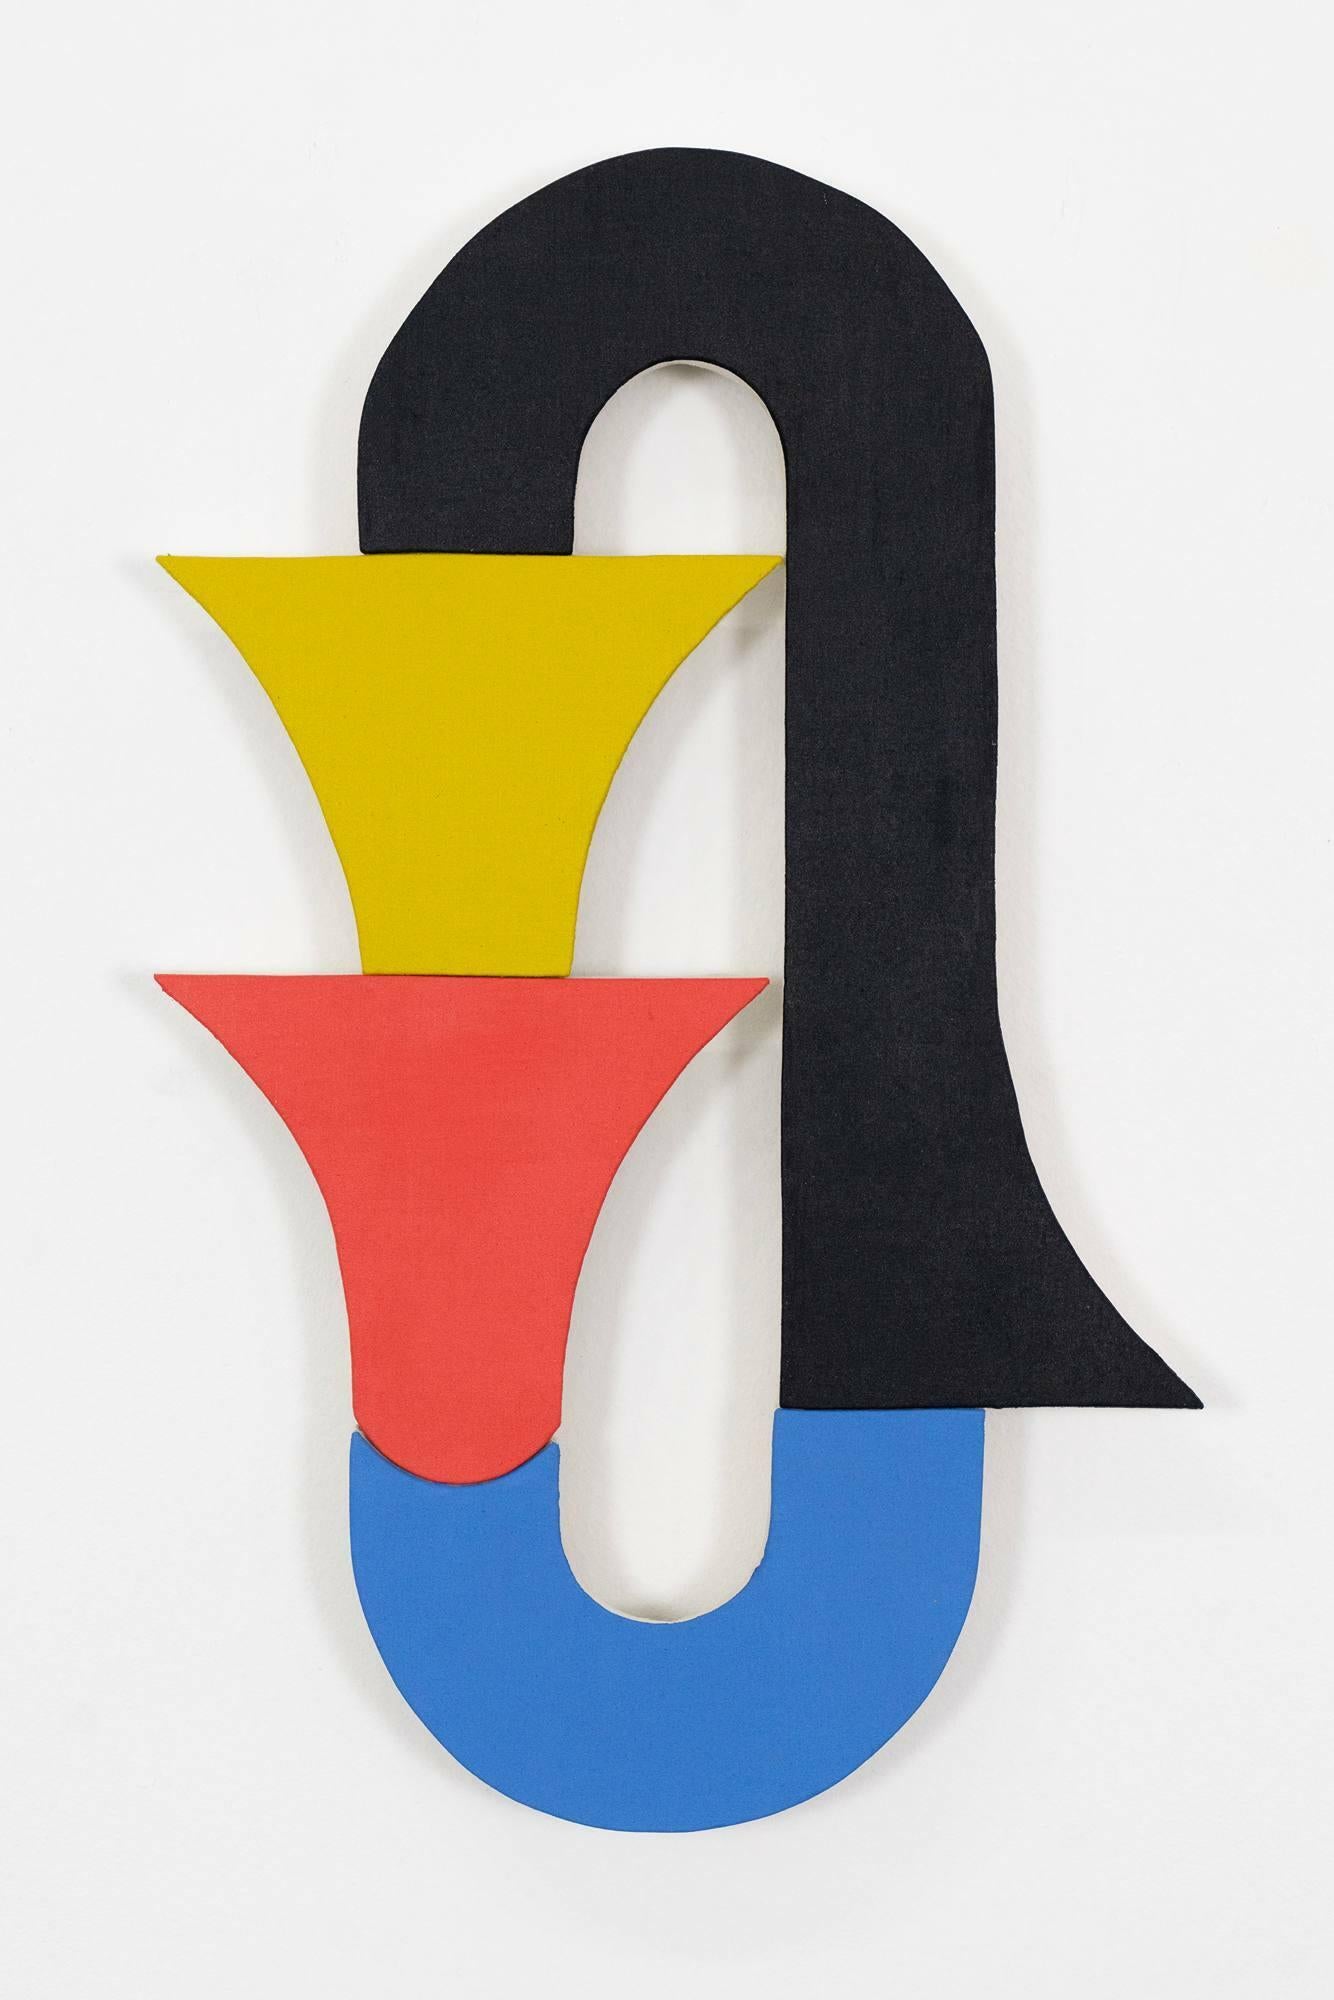 Jason Matherly Abstract Sculpture - "22-3" Mixed Media Wall Sculpture painting- black, blue, yellow, red